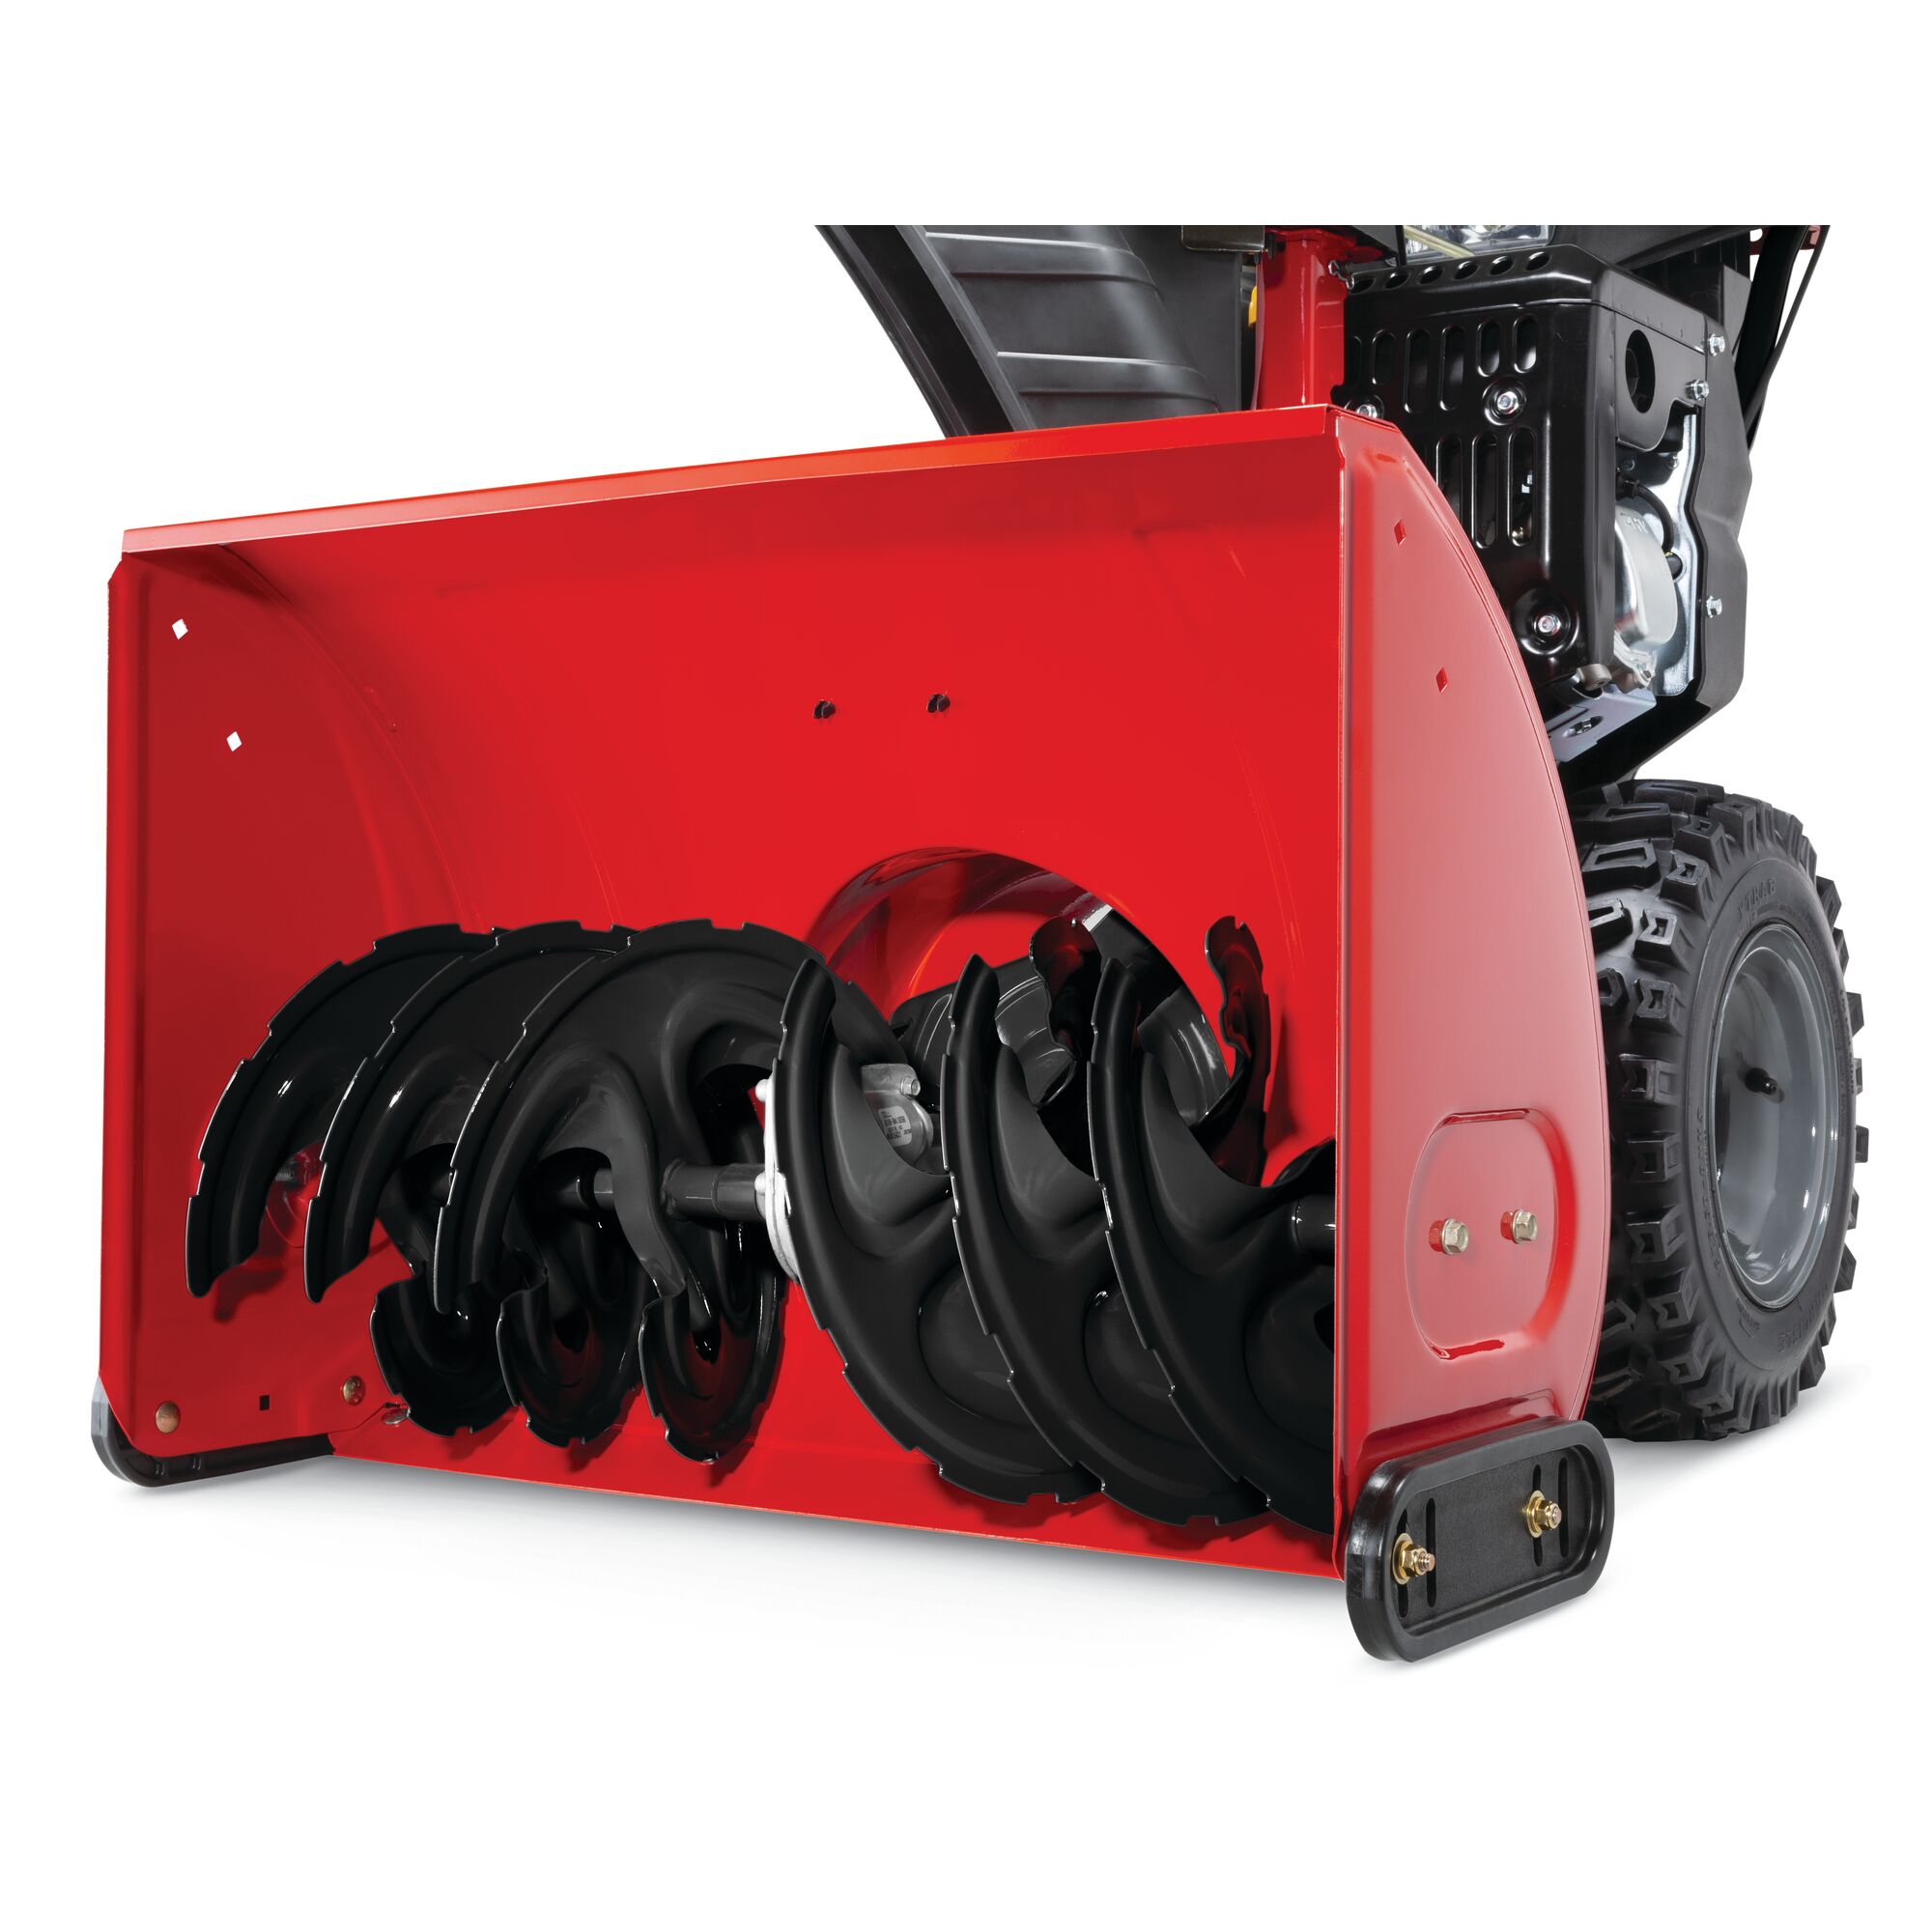 Enhanced clearing power feature in 30 inch 357 CC electric start two stage snow blower.